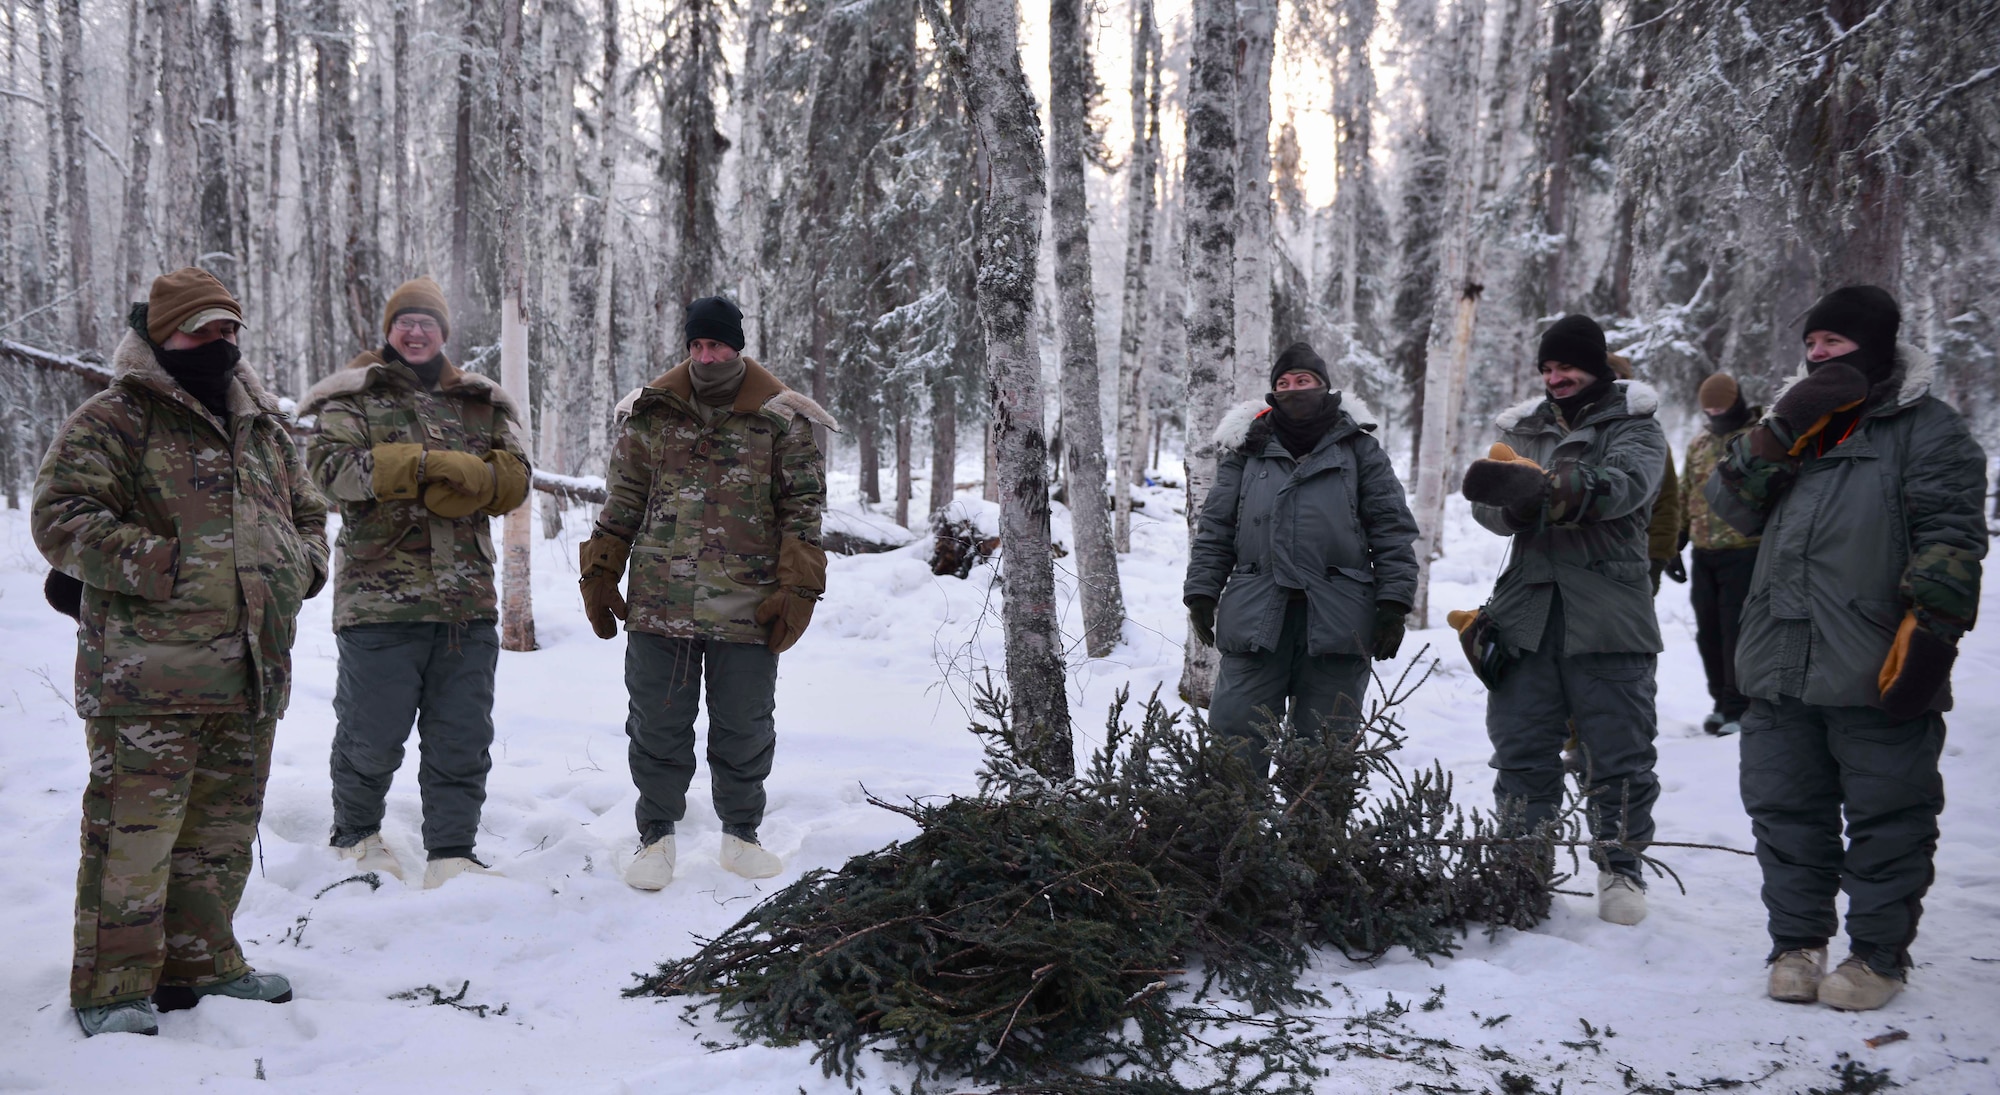 Distinguished leaders from the 58th Special Operations Wing interact with Arctic Survival Training students during a leadership immersion on Eielson Air Force Base, Alaska, Jan. 27, 2021.